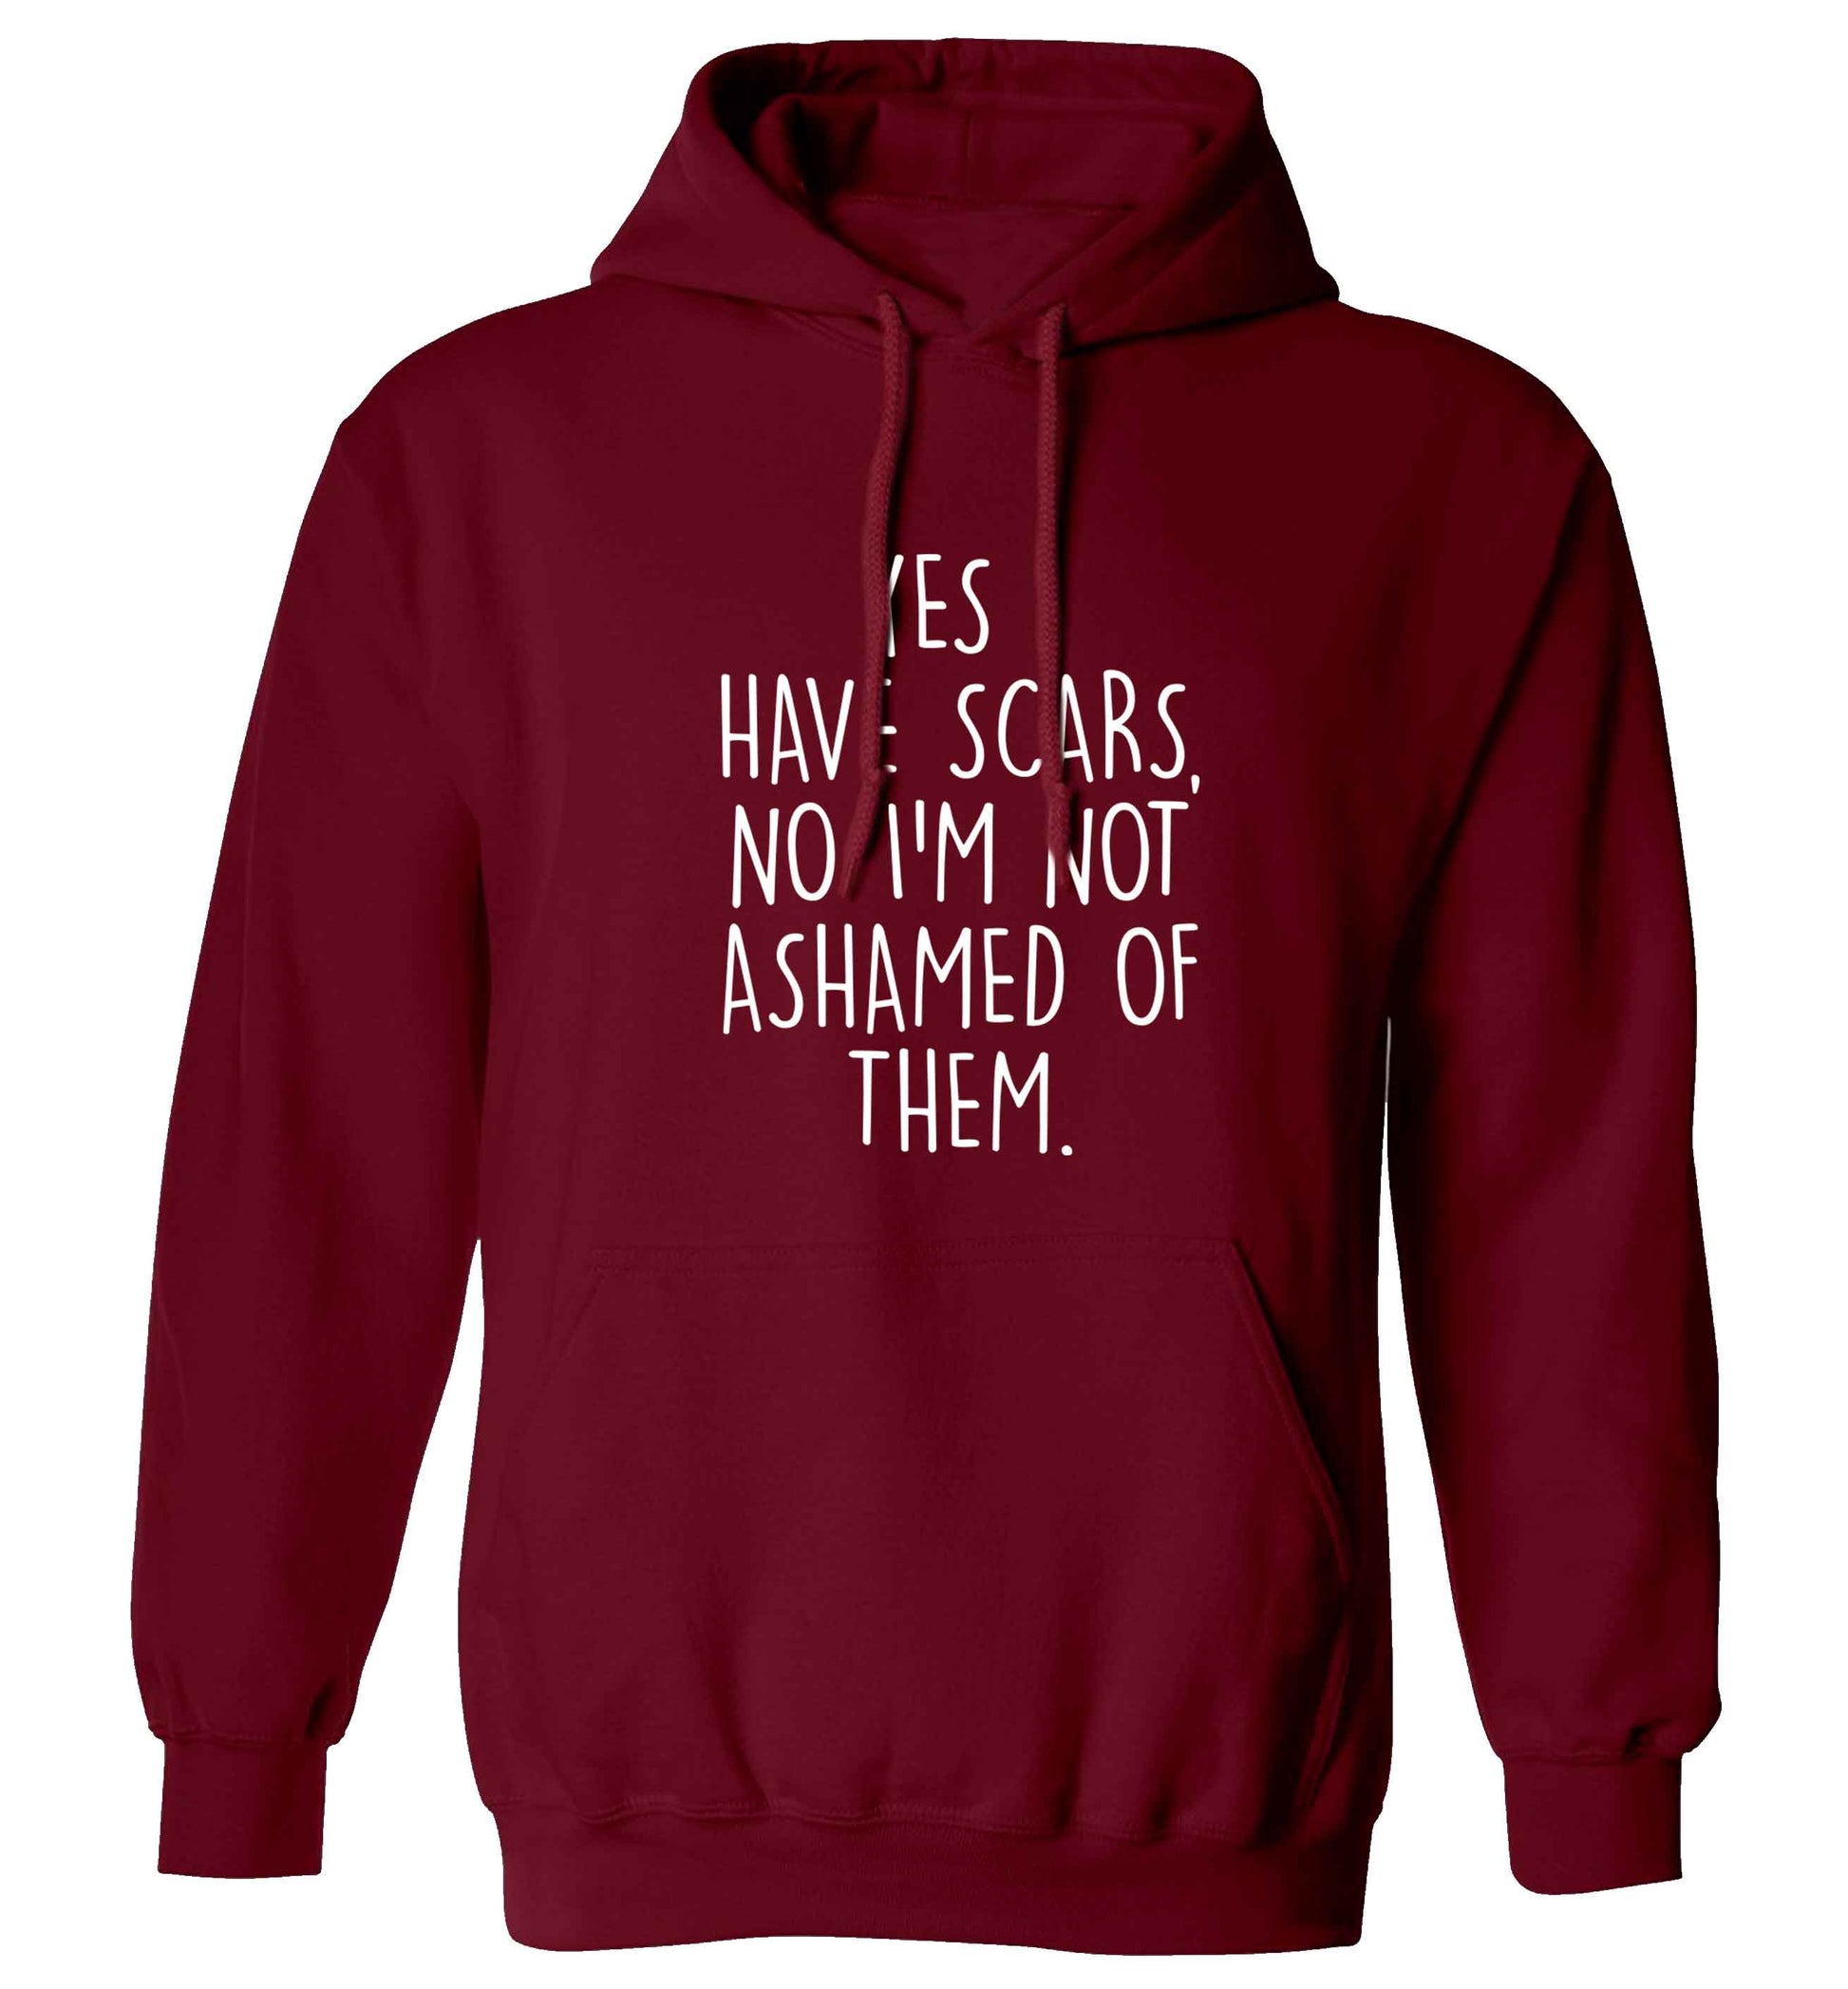 Yes I have scars, no I'm not ashamed of them adults unisex maroon hoodie 2XL